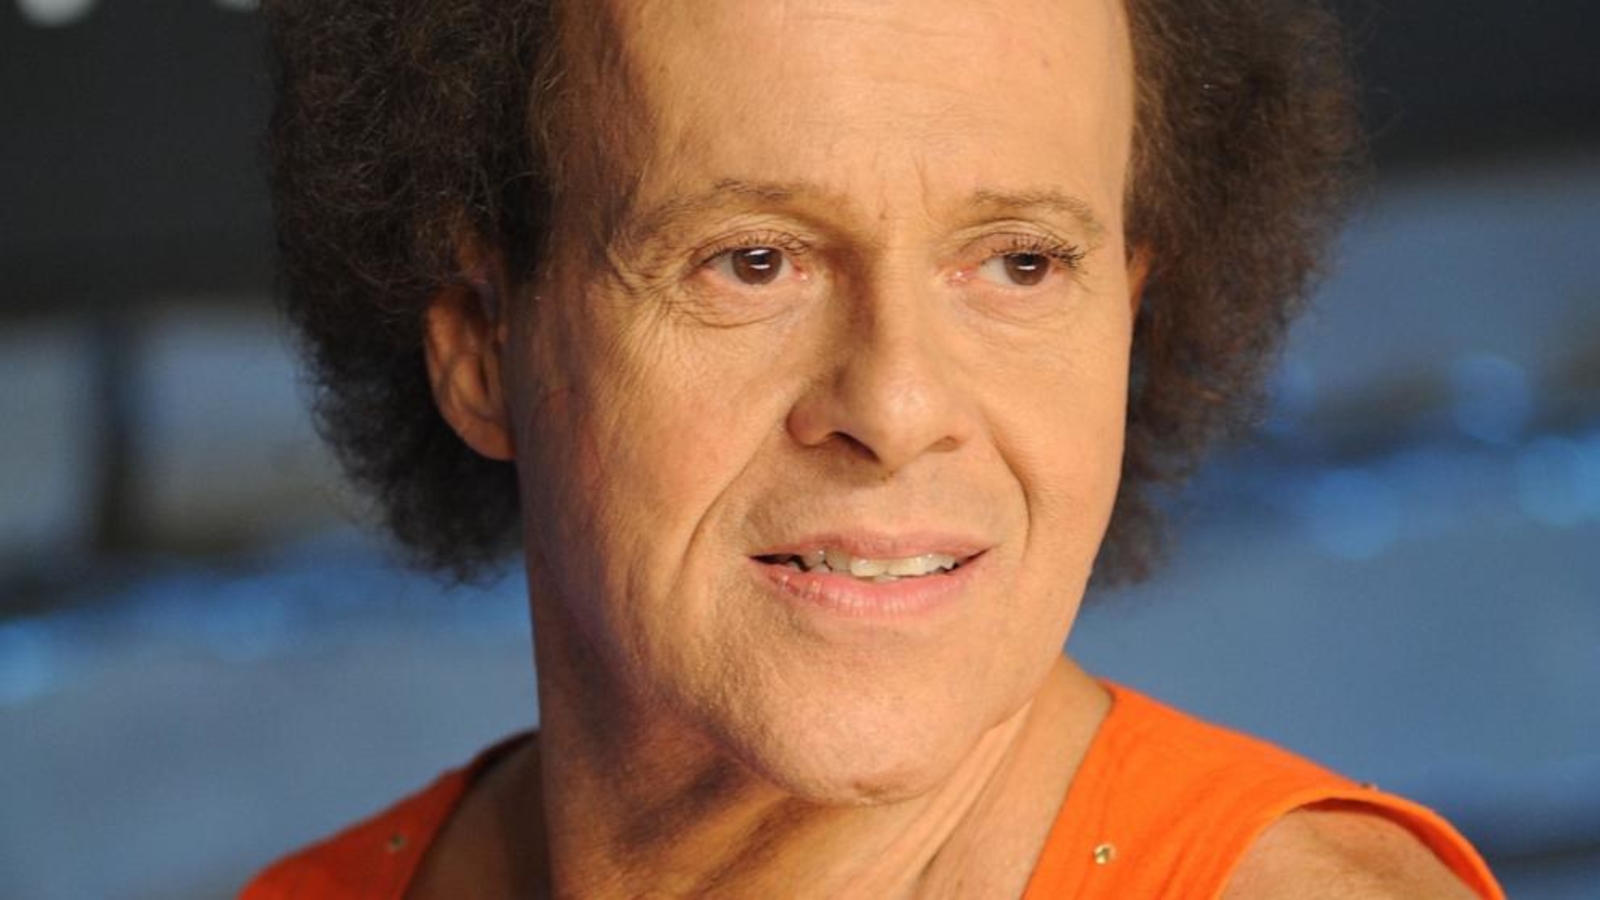 Richard Simmons shares he has been diagnosed with skin cancer [Video]